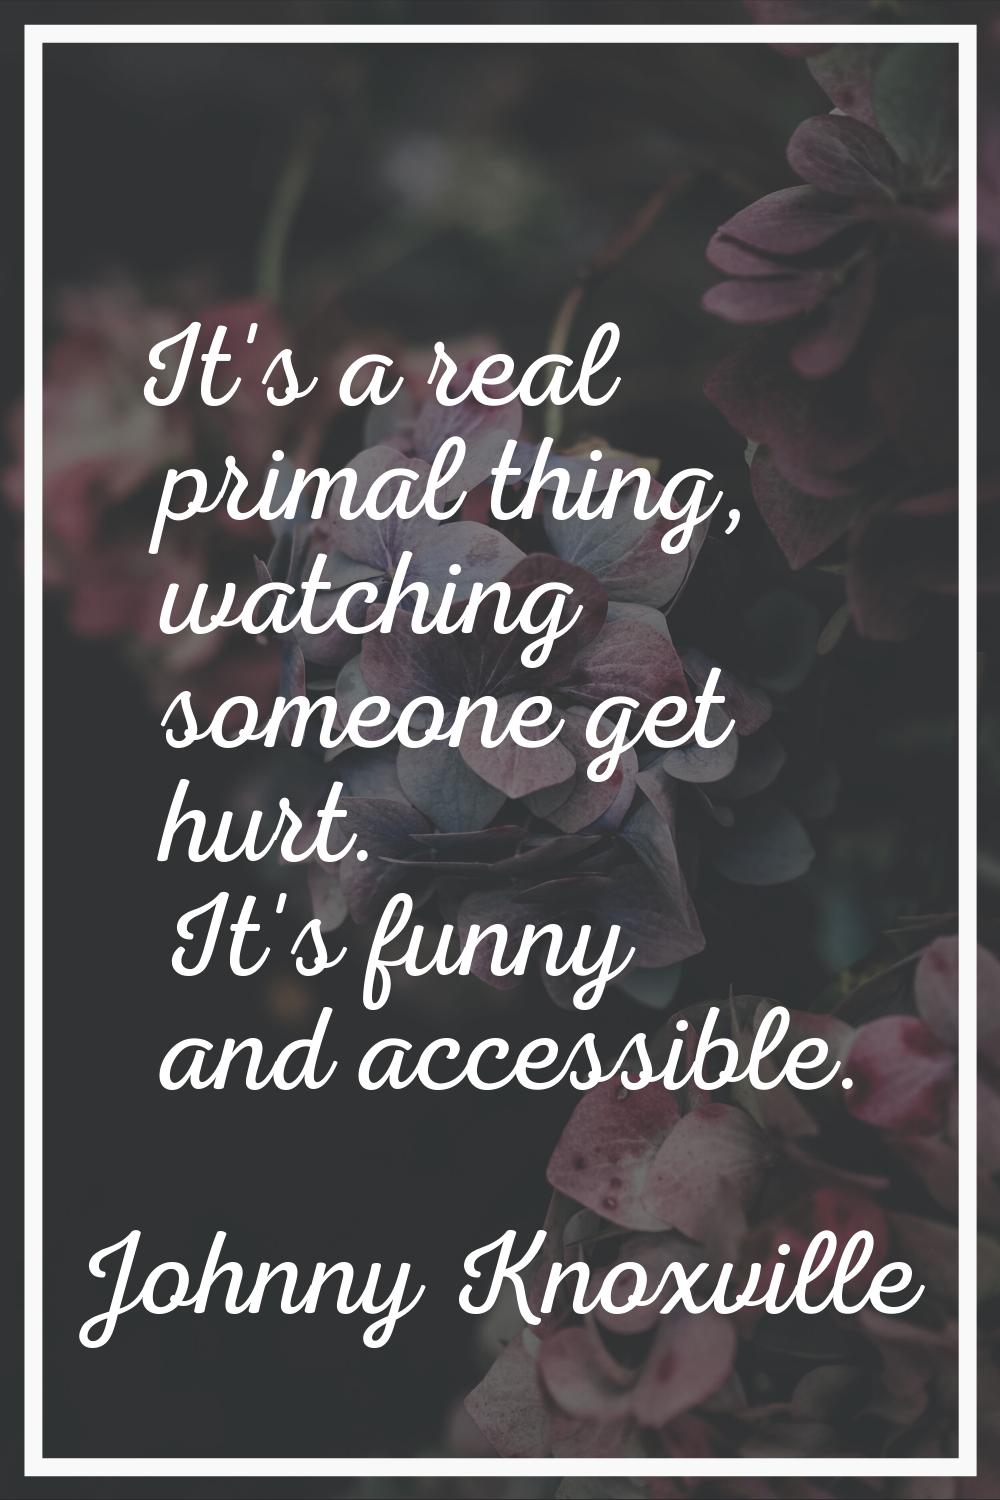 It's a real primal thing, watching someone get hurt. It's funny and accessible.